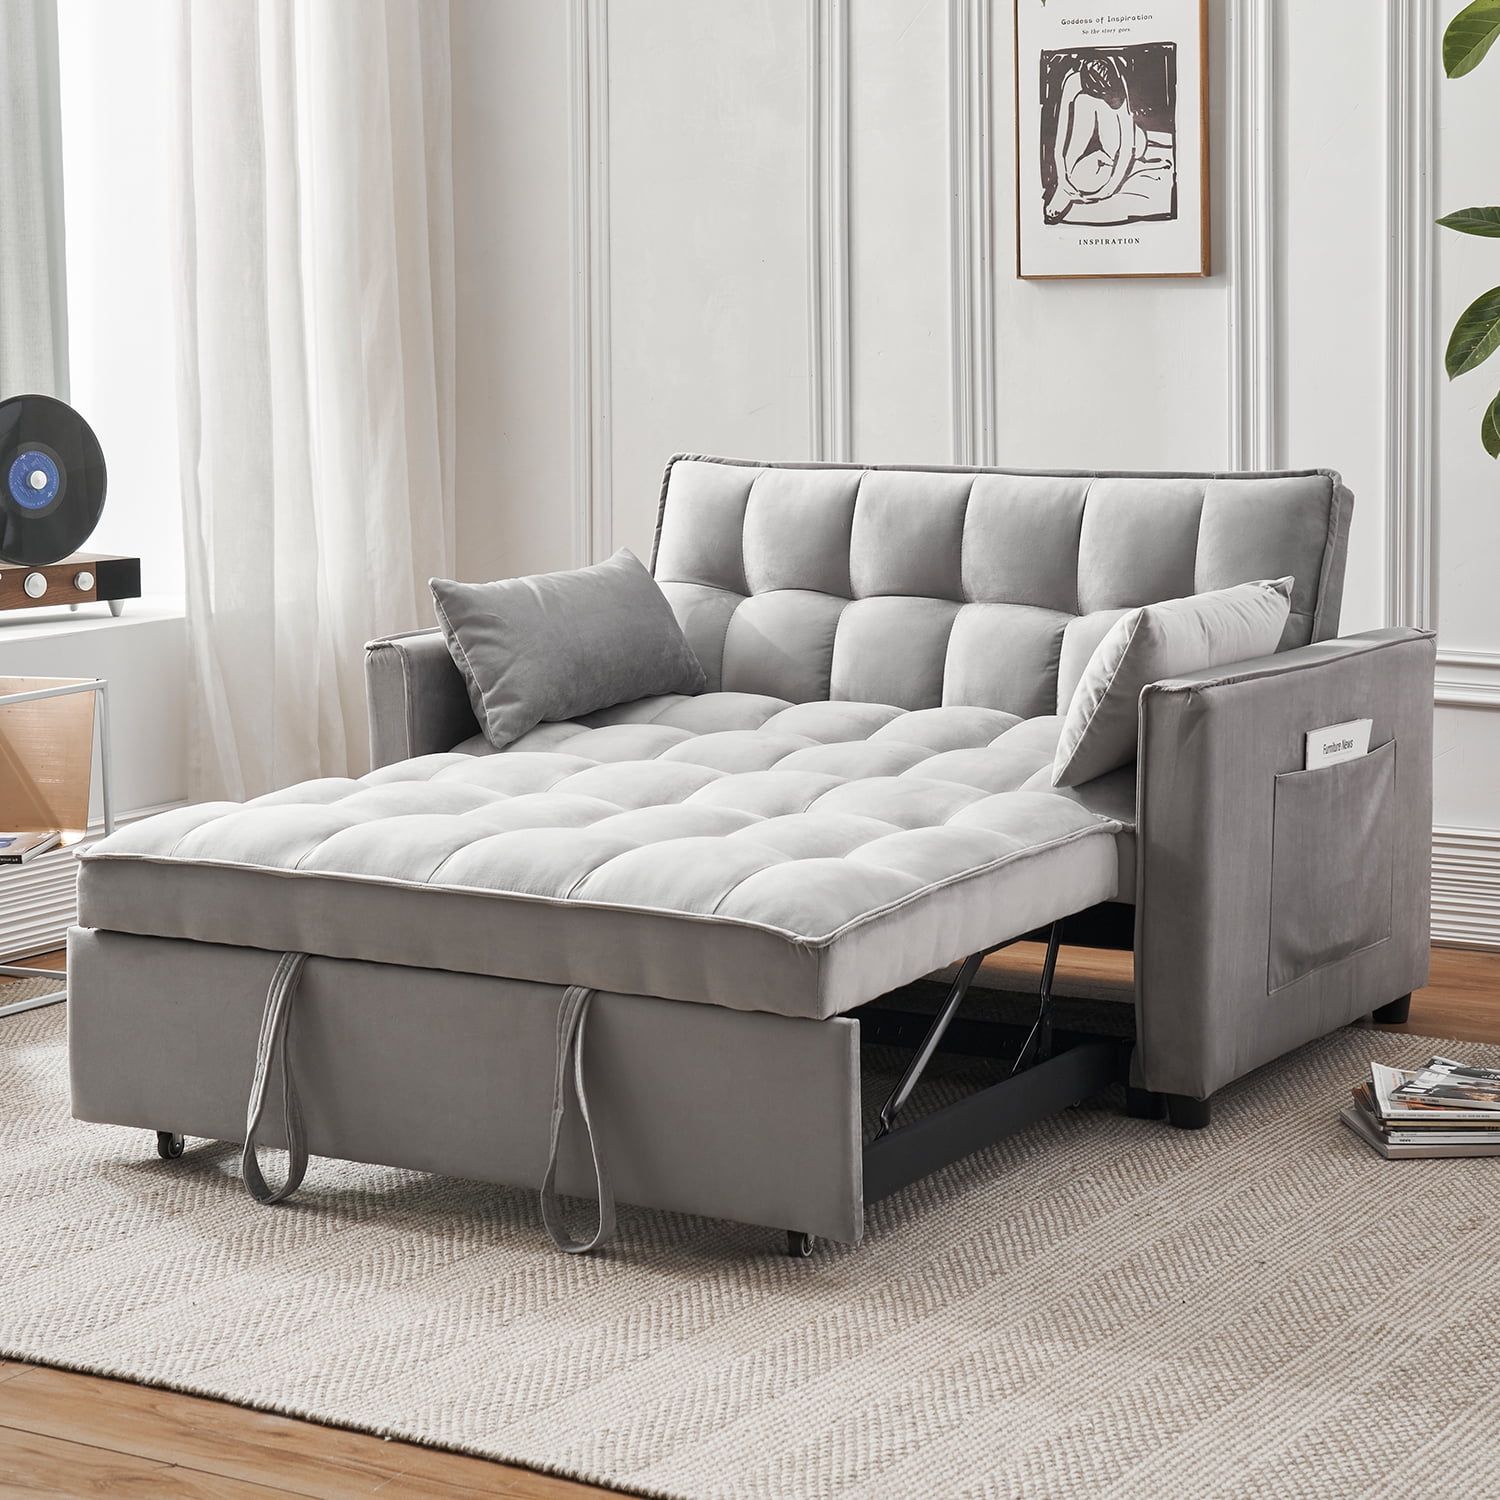 Tzicr 55.5'' 3 In 1 Convertible Sleeper Sofa Bed, Modern Velvet Loveseat  Futon Couch Pullout Bed With Adjustable Backrest, Side Storage Pockets And  Pillows (View 5 of 15)